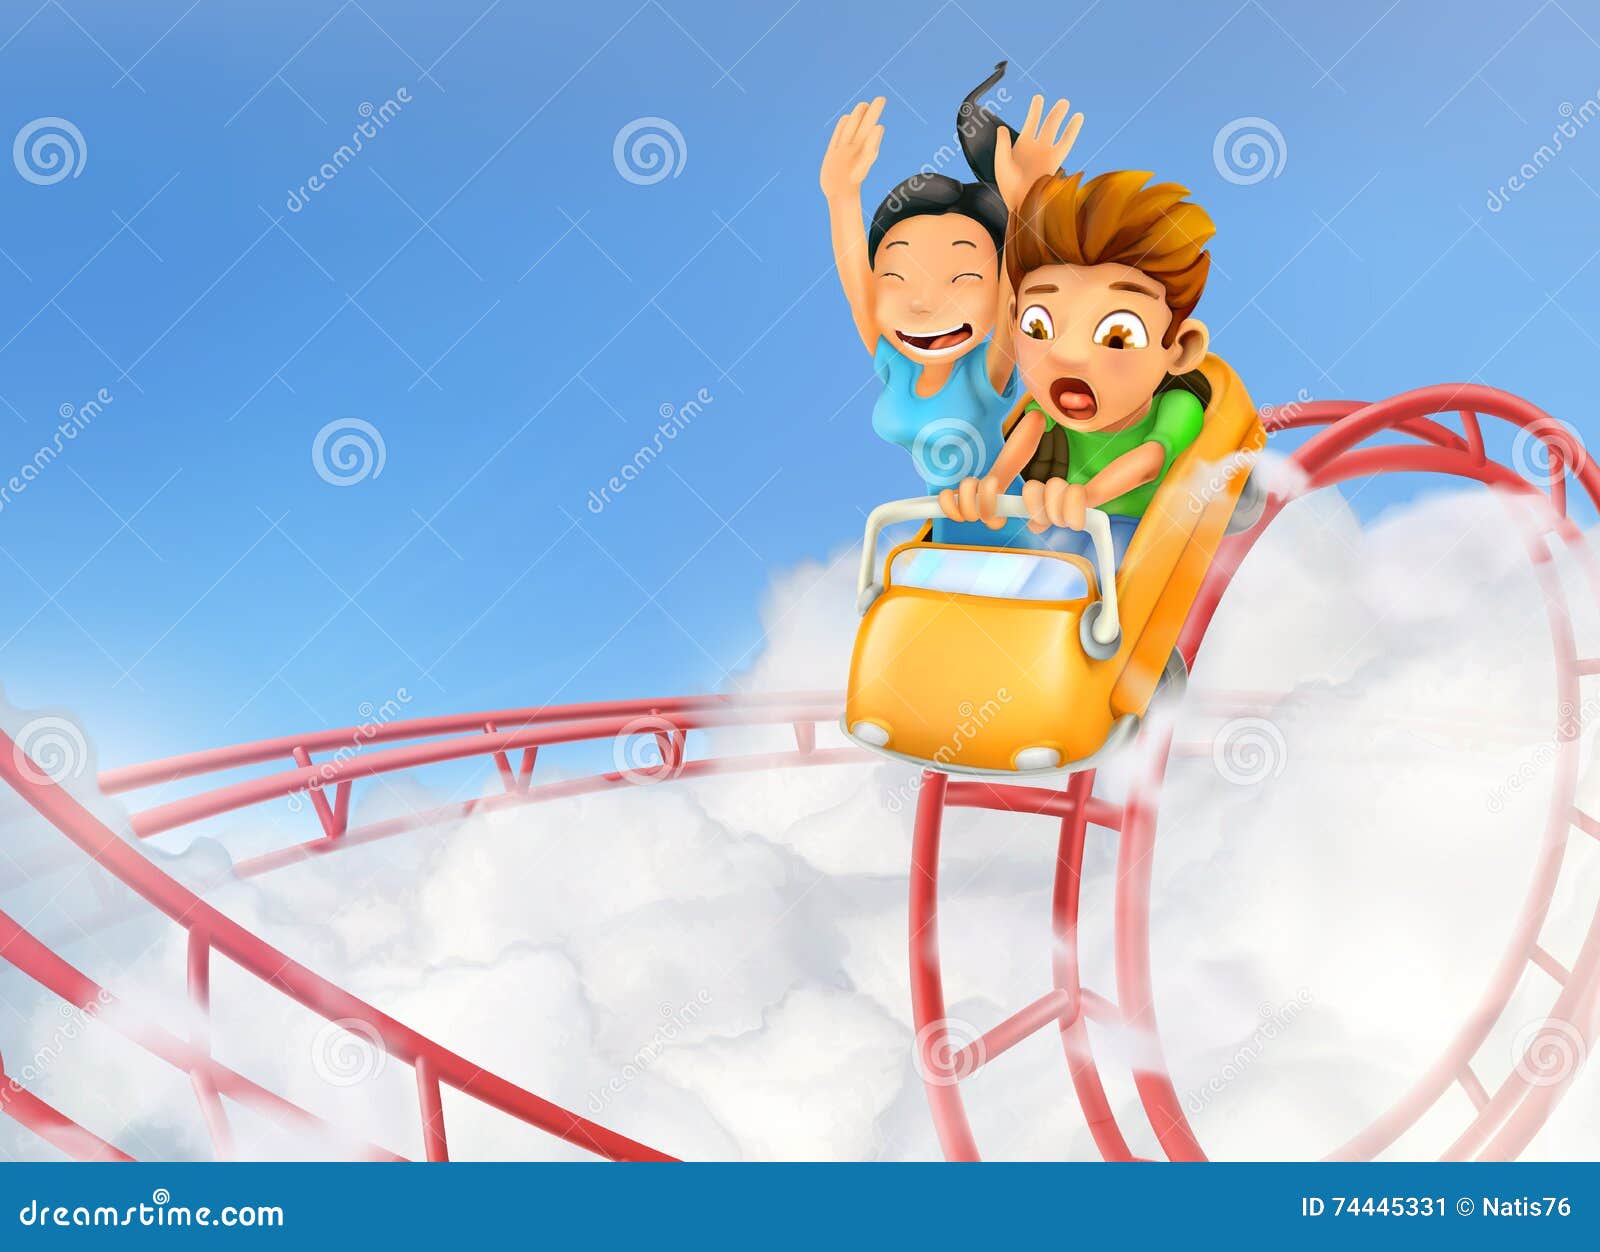 roller coaster in the clouds